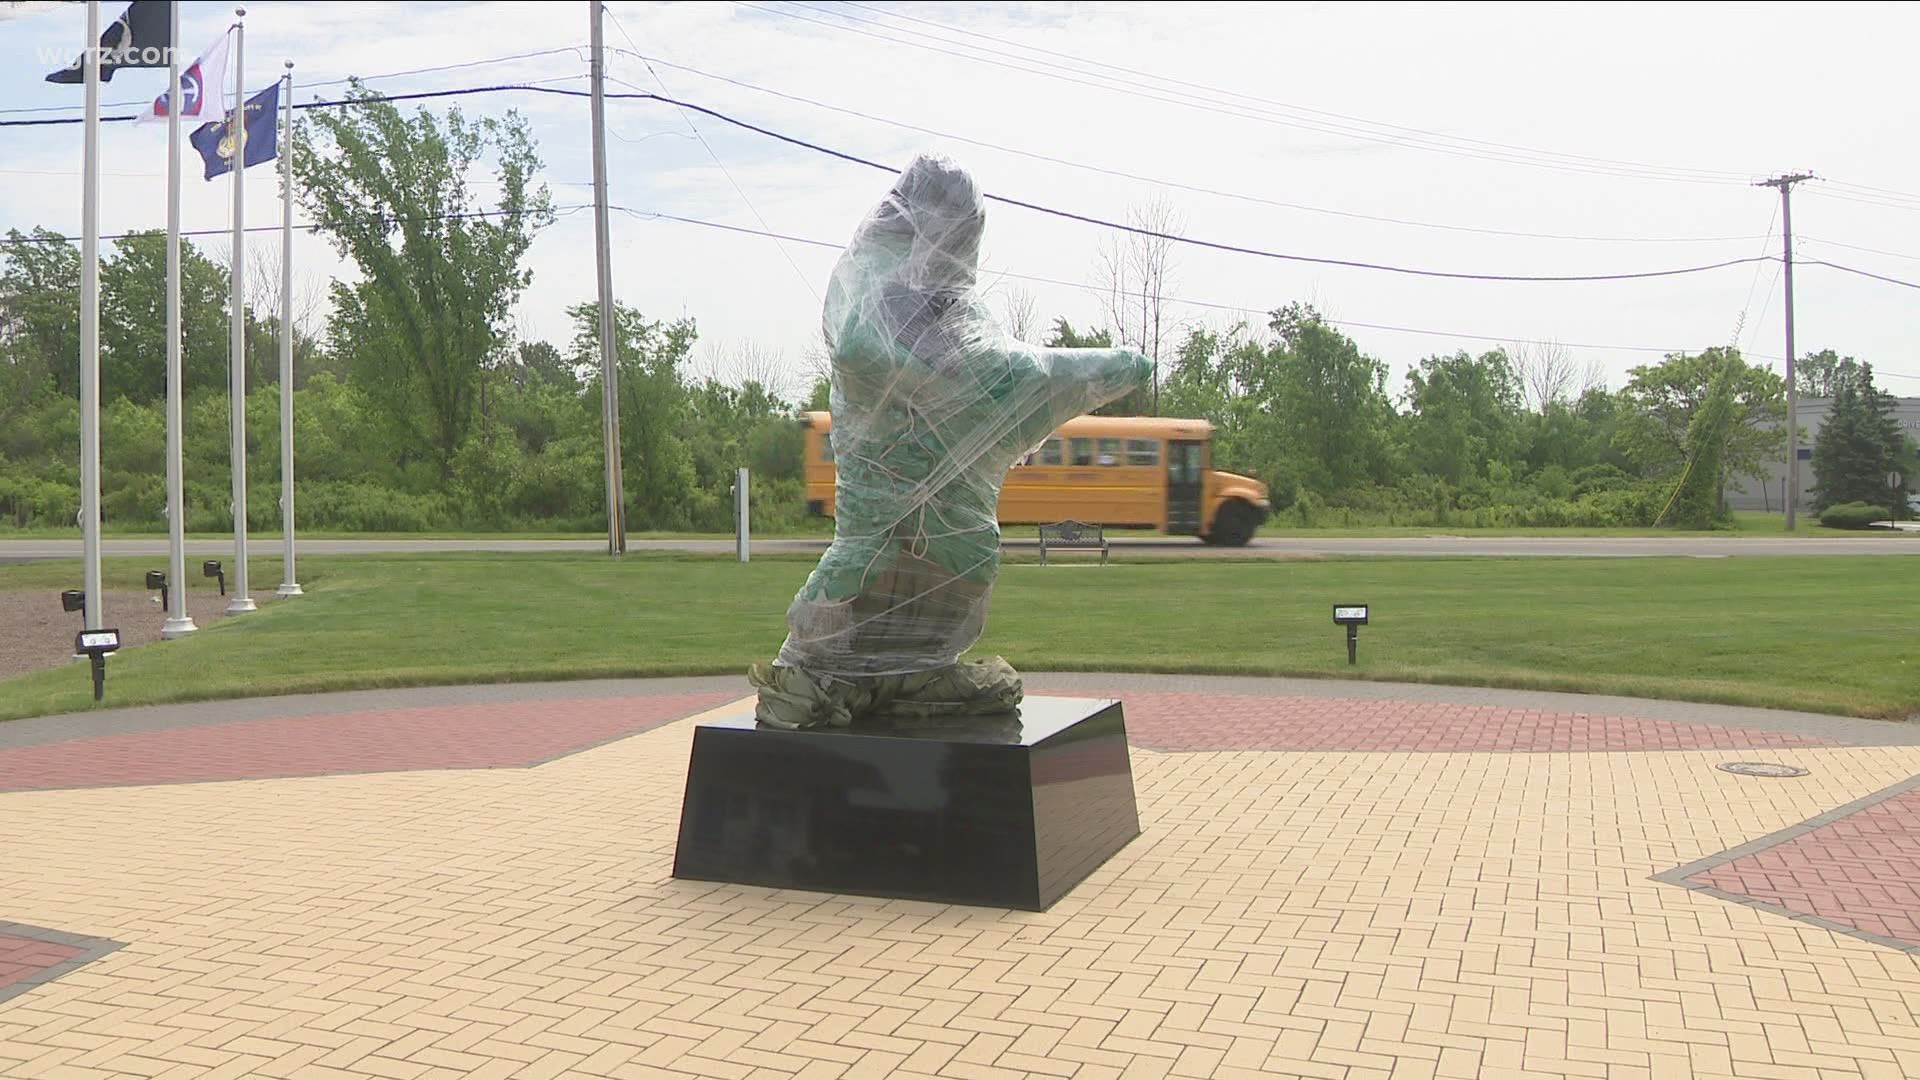 When it's unveiled Saturday, it will become the centerpiece of the memorial remembering Grand Island veterans.